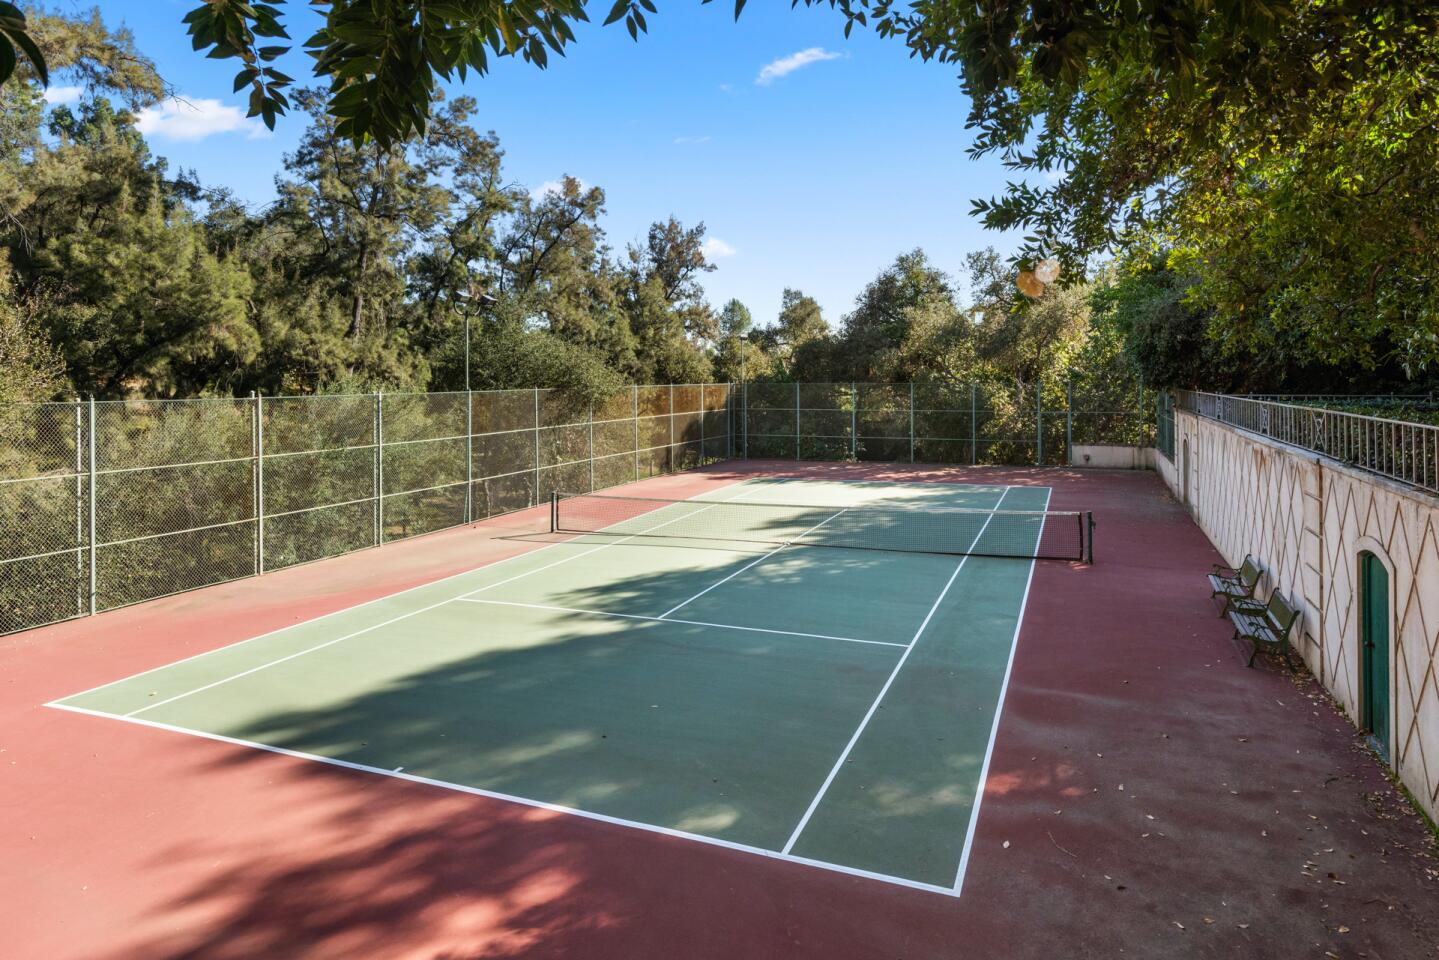 The tennis court surrounded by trees